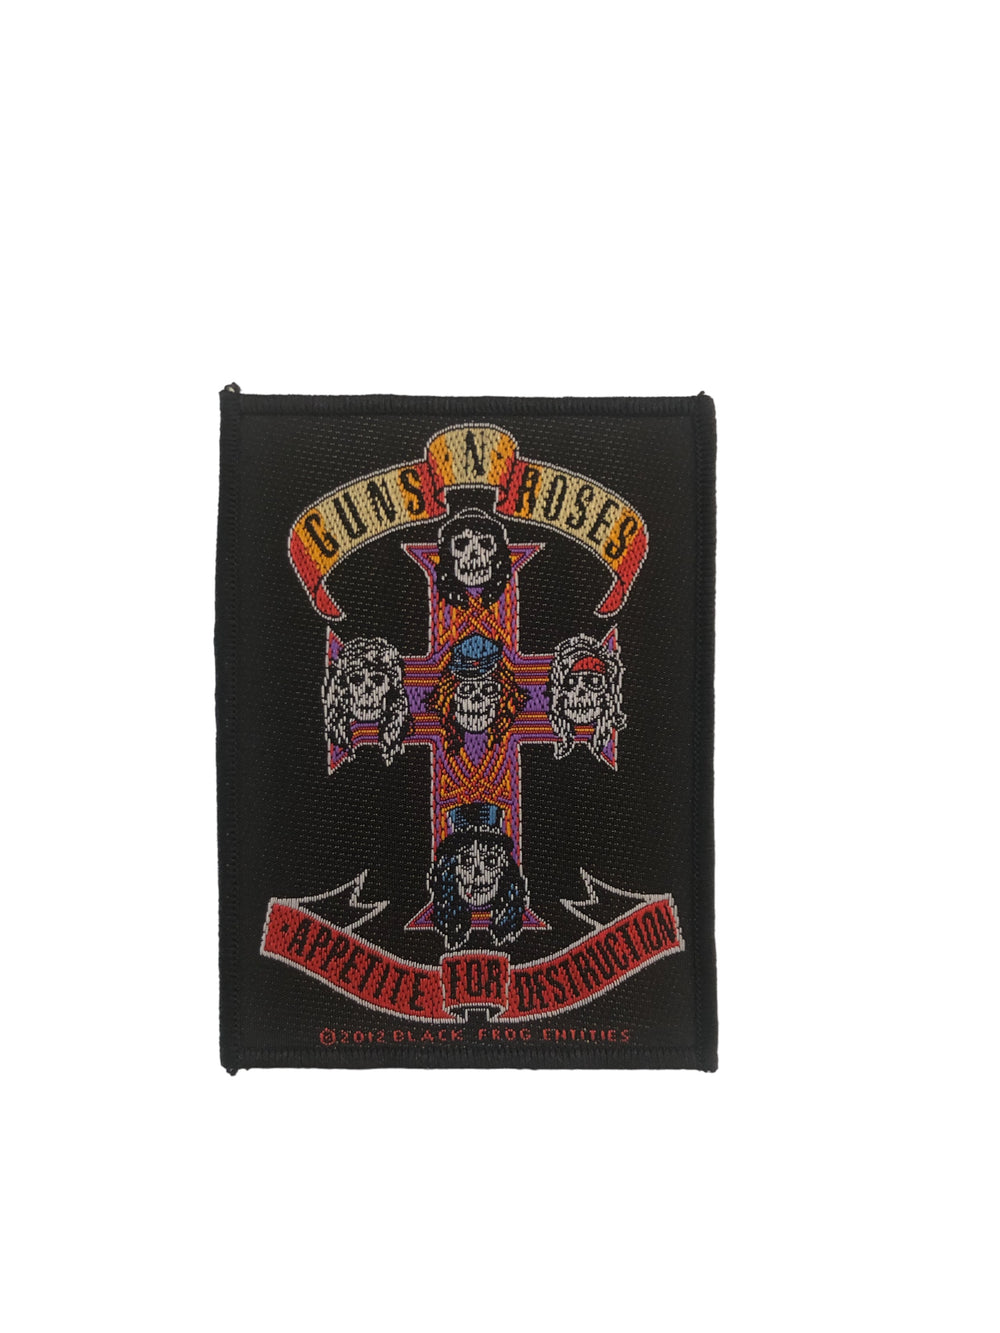 Guns n Roses Standard Woven Patch: Appetite Official New